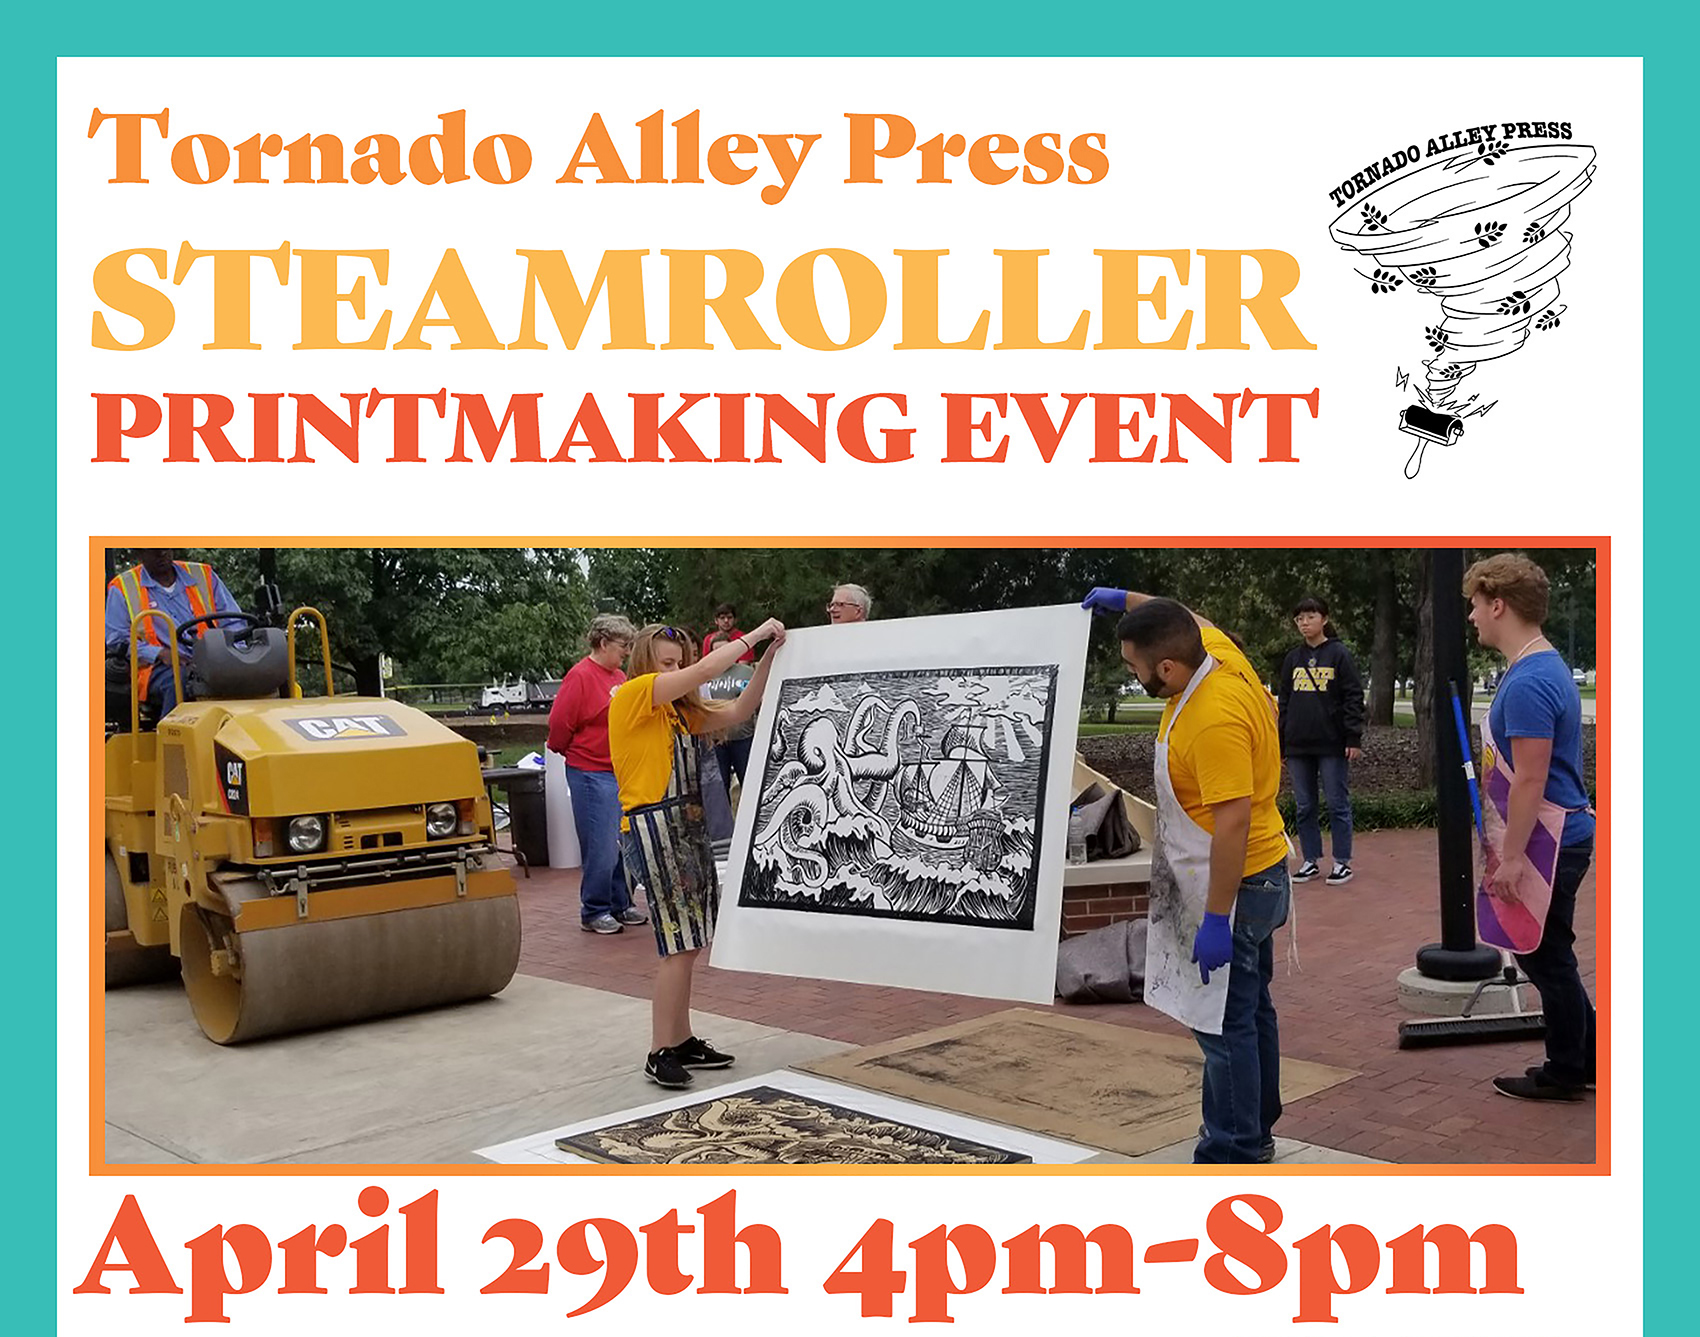 Rectangular graphic announcing the Tornado Alley Press Streamroller Printmaking Event. A light blue border is present at the top and sides of the graphic. At the top left is orange text that reads: "Tornado Alley Press," followed by gold text that reads: "Steamroller," and red text that reads: "Printmaking Event." Below the text is a photo of last year's printmaking event, with two students lifting a print of an octopus off a wooden block. Below the picture is orange text that reads: "April 29th 4pm-8pm." The Tornado Alley Press logo, a tornado with leaves springing out of an ink brayer is placed in the top right corner beside the main text. 